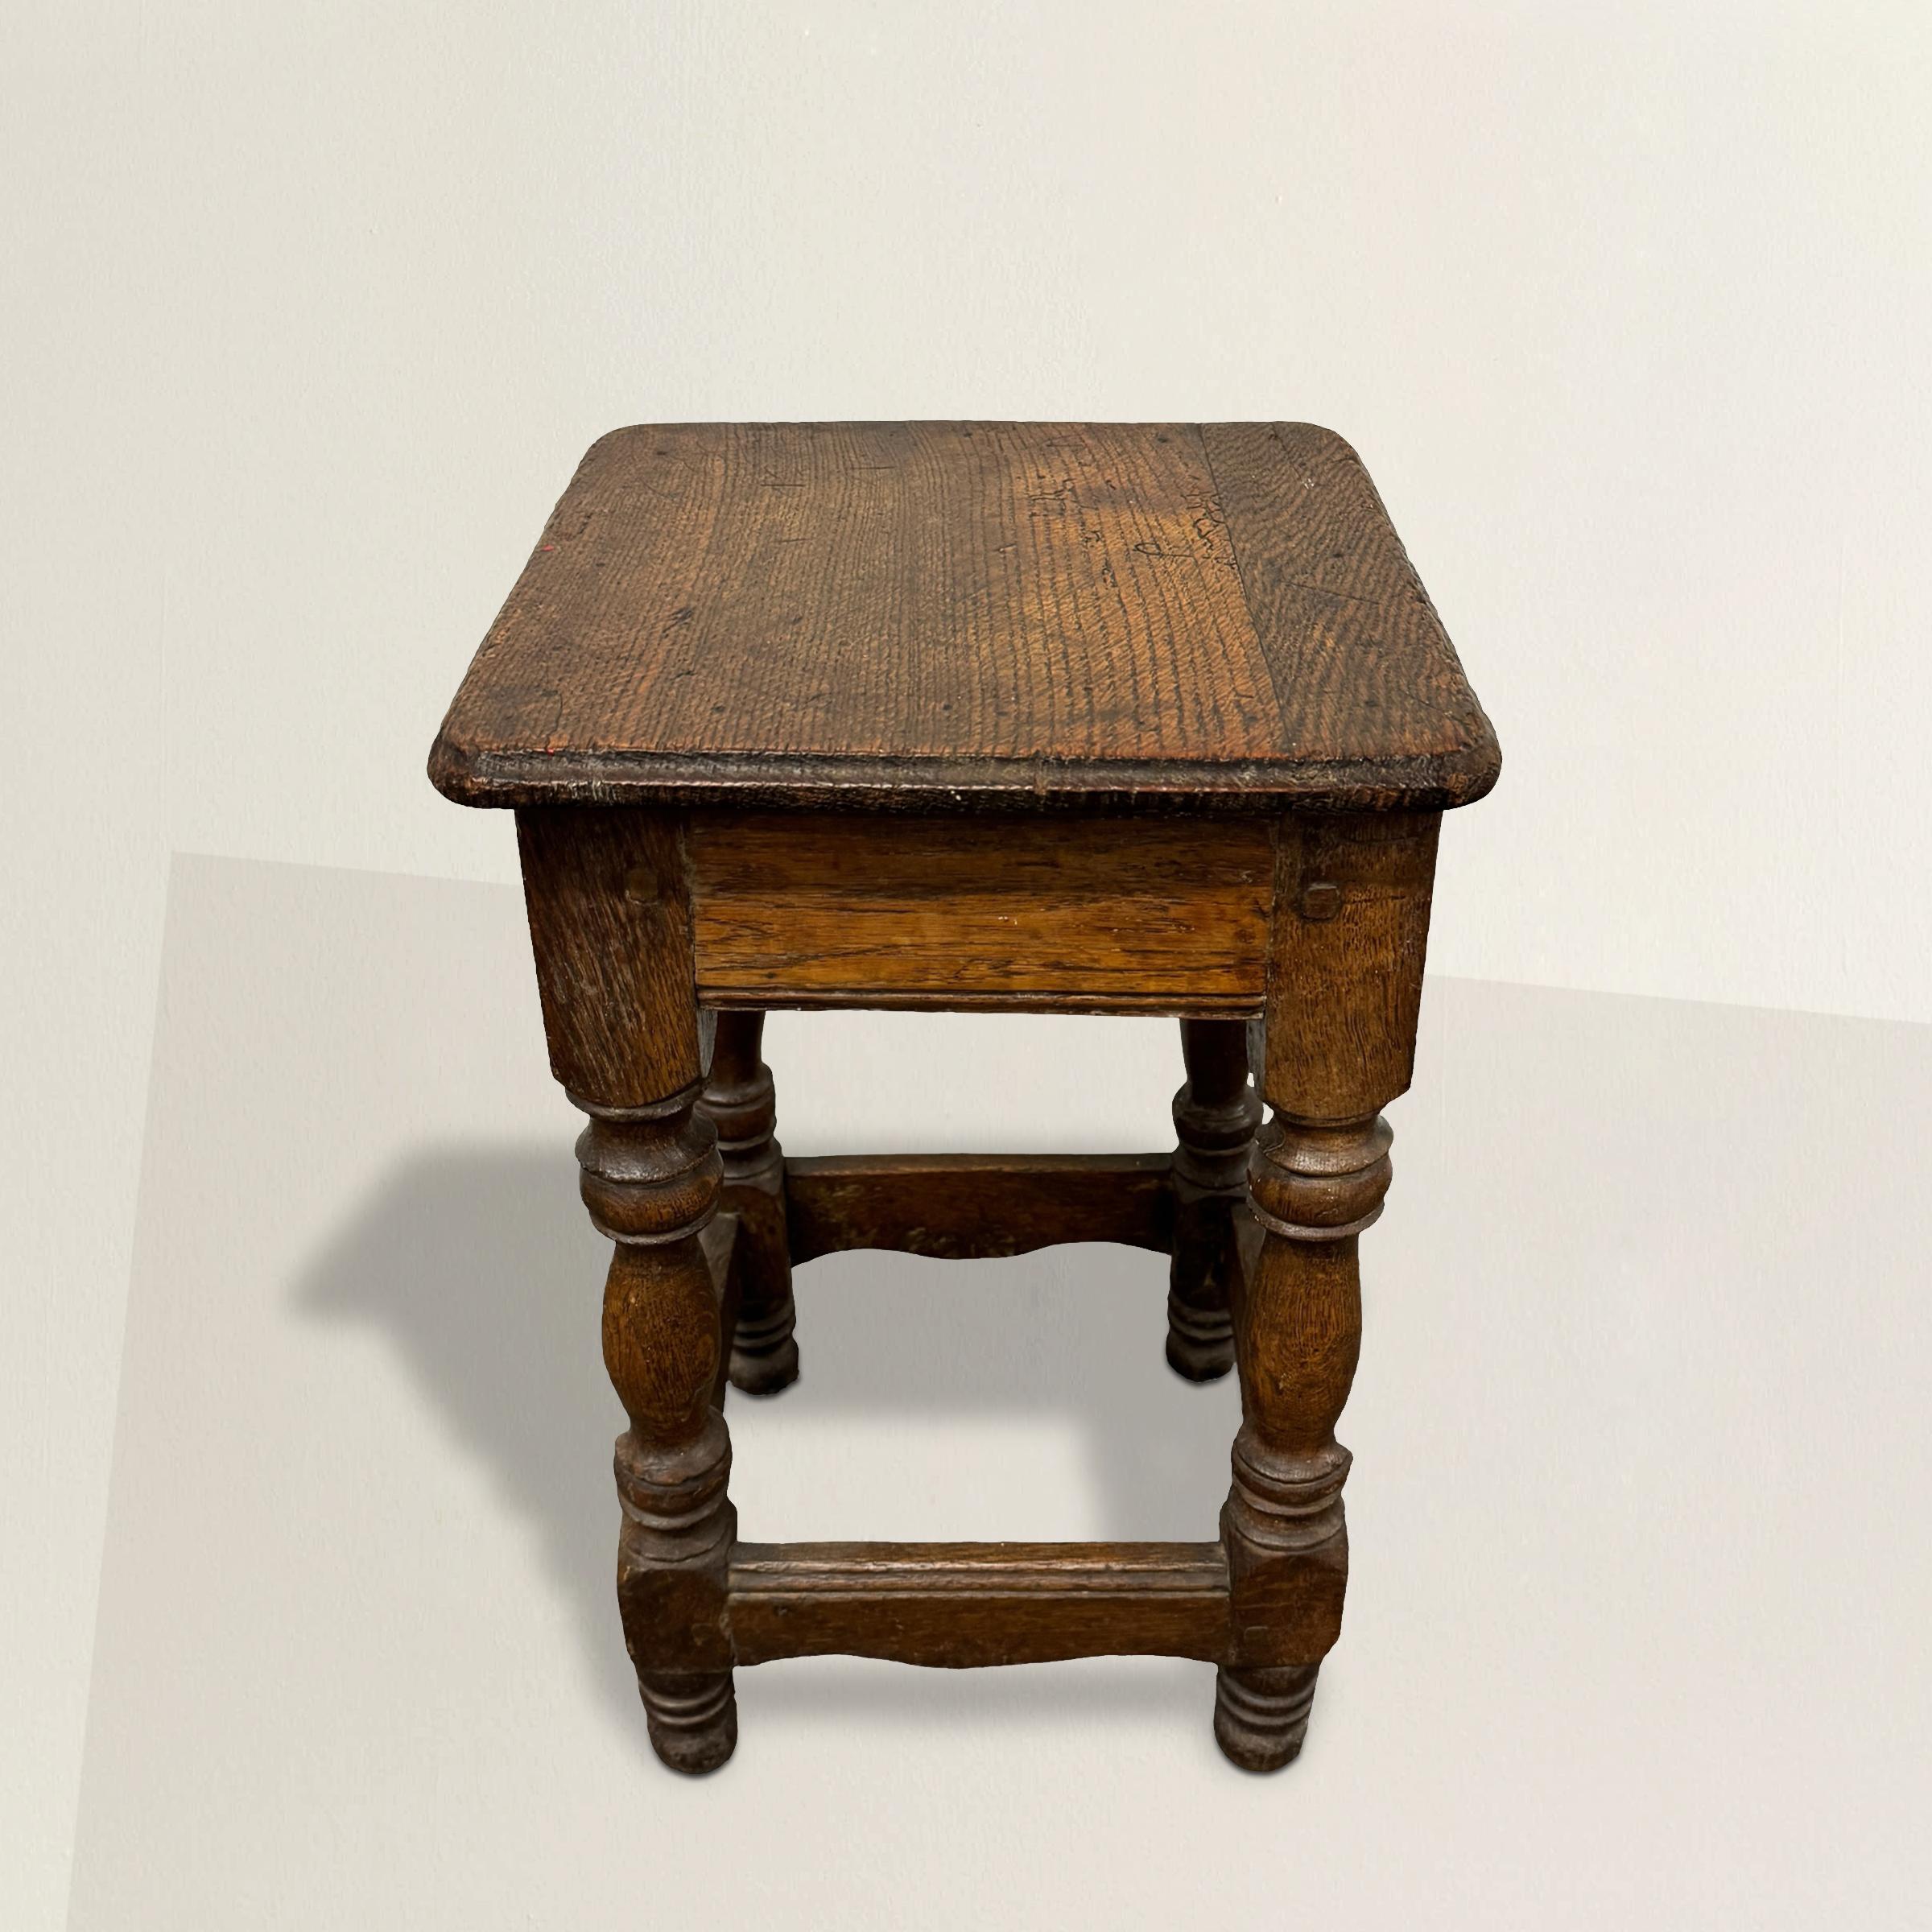 This 18th-century French turned oak stool is a magnificent example of timeless elegance and exquisite craftsmanship. With beautifully turned legs, gently scrolled apron, and a footrest, this stool exudes charm and sophistication.

The remarkable